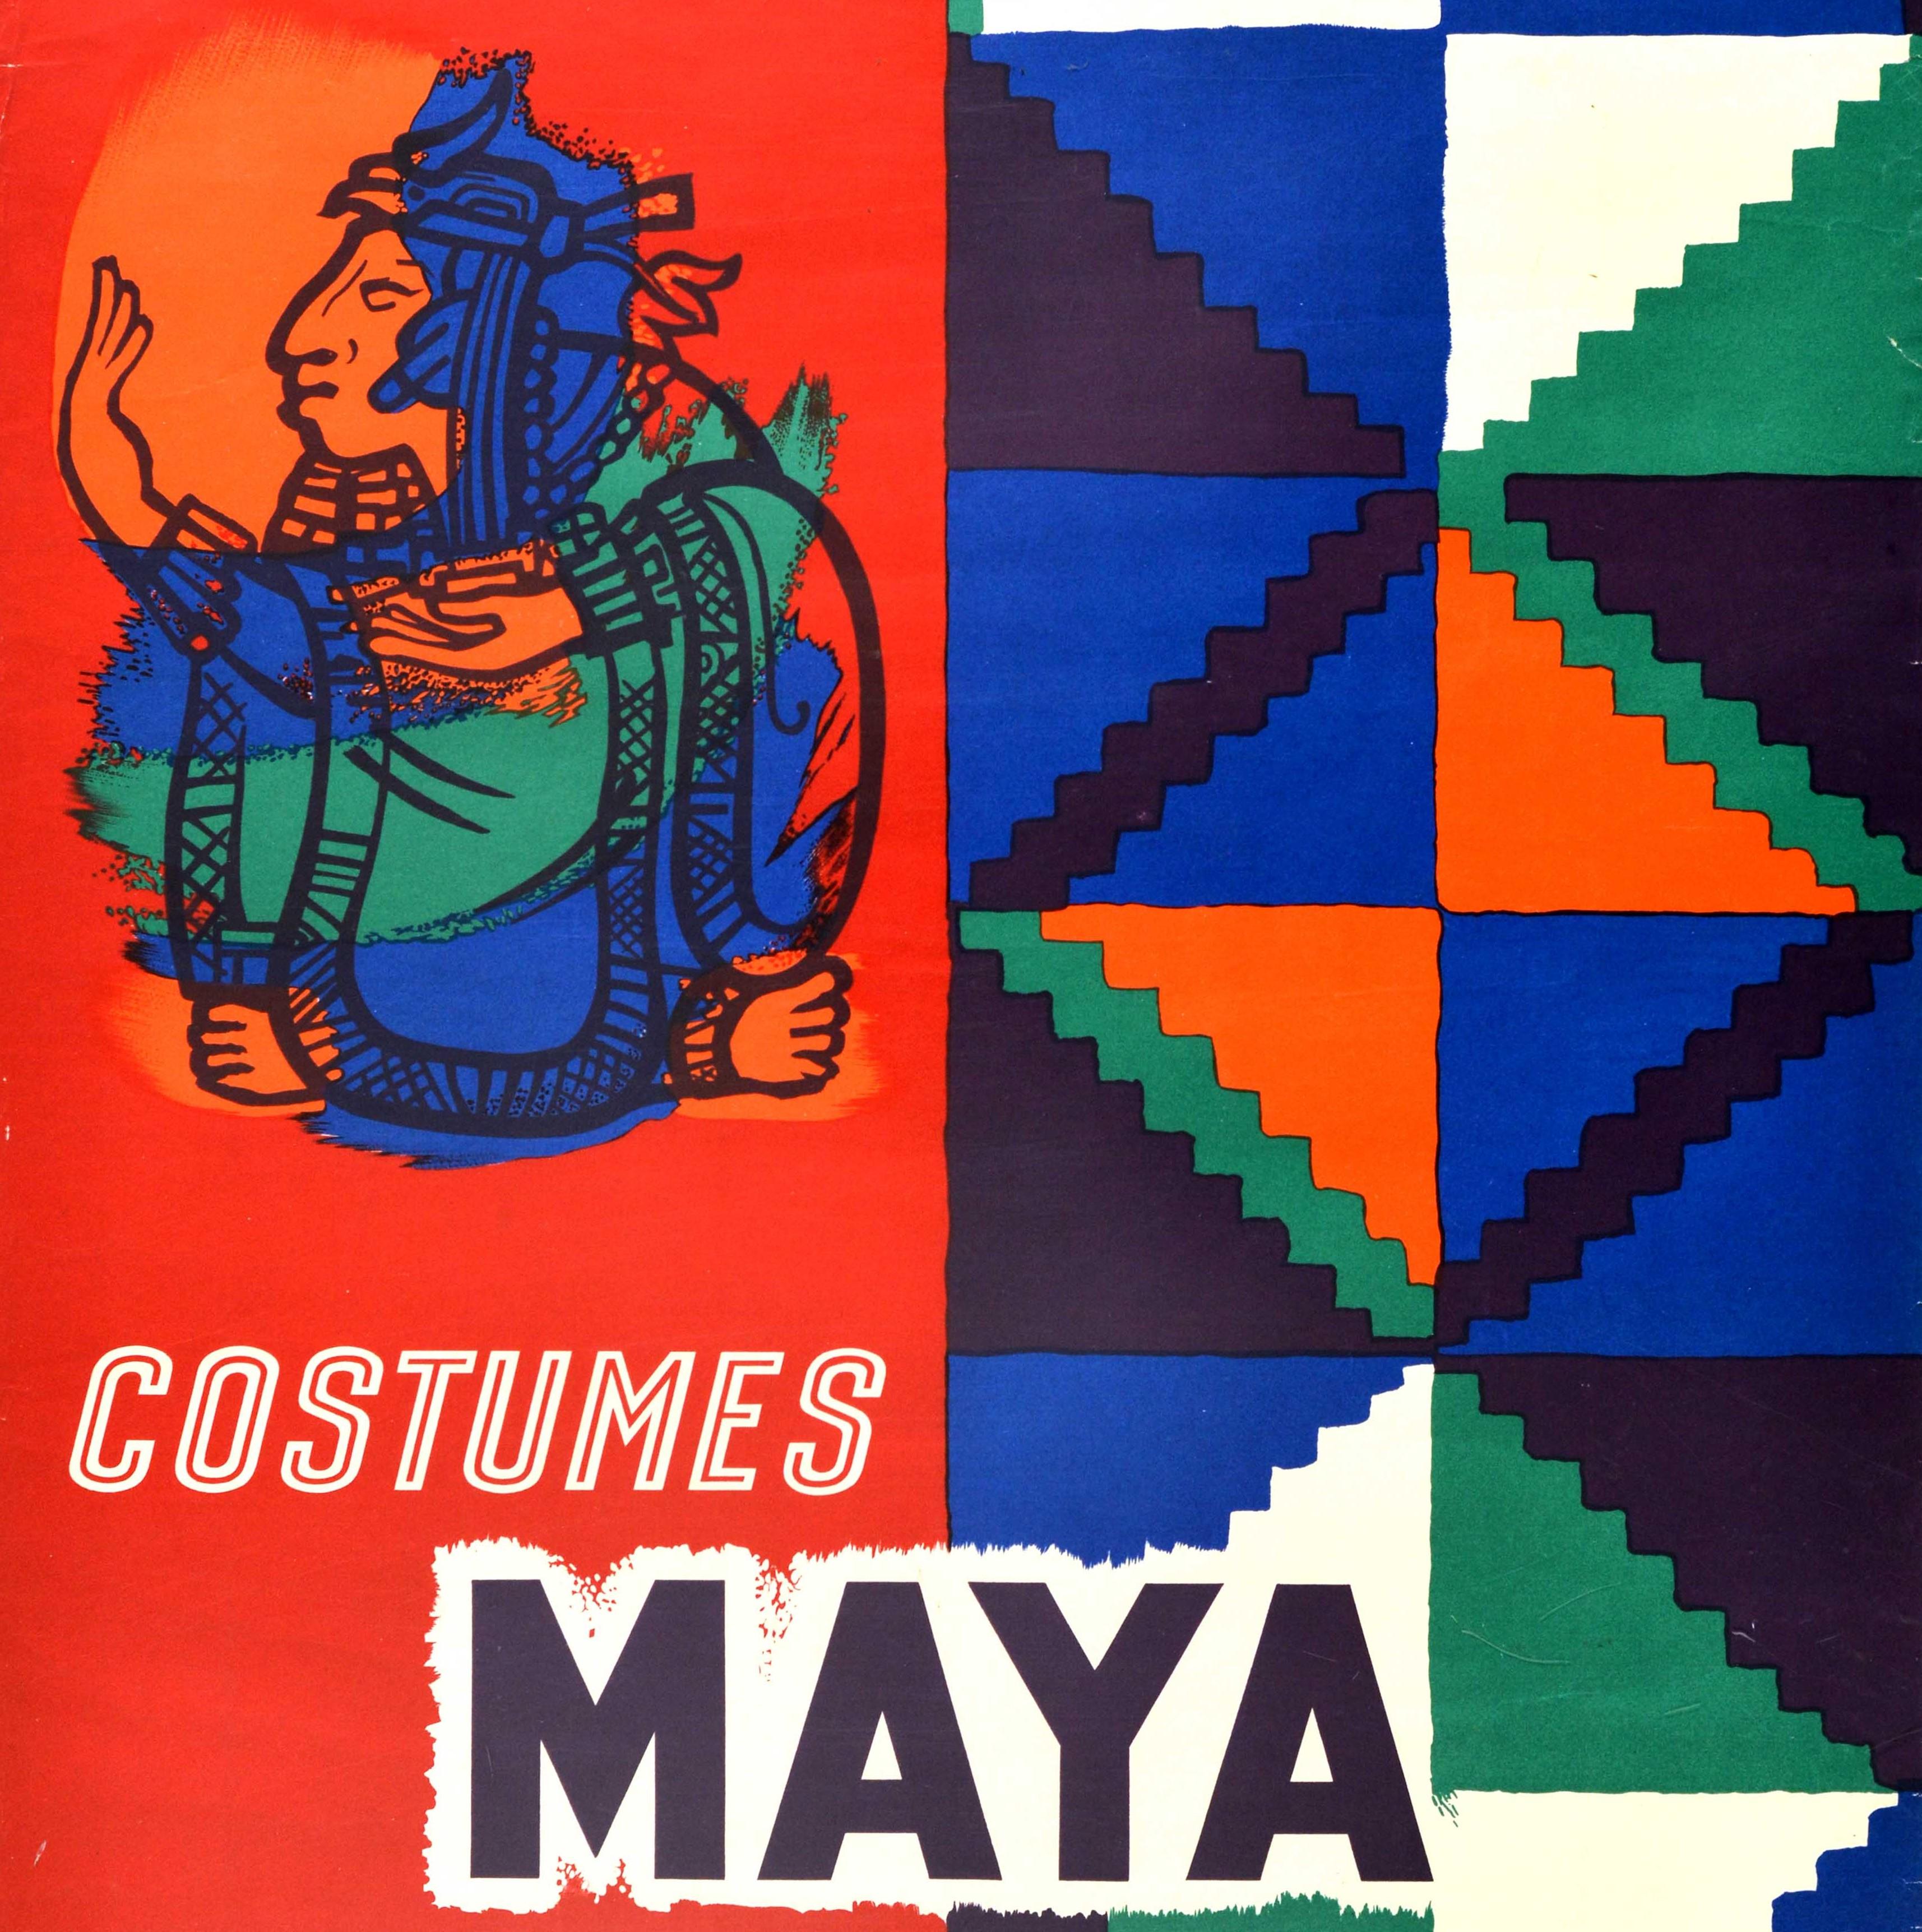 French Original Vintage Exhibition Poster Musee De L'Homme Costumes Maya Design History For Sale